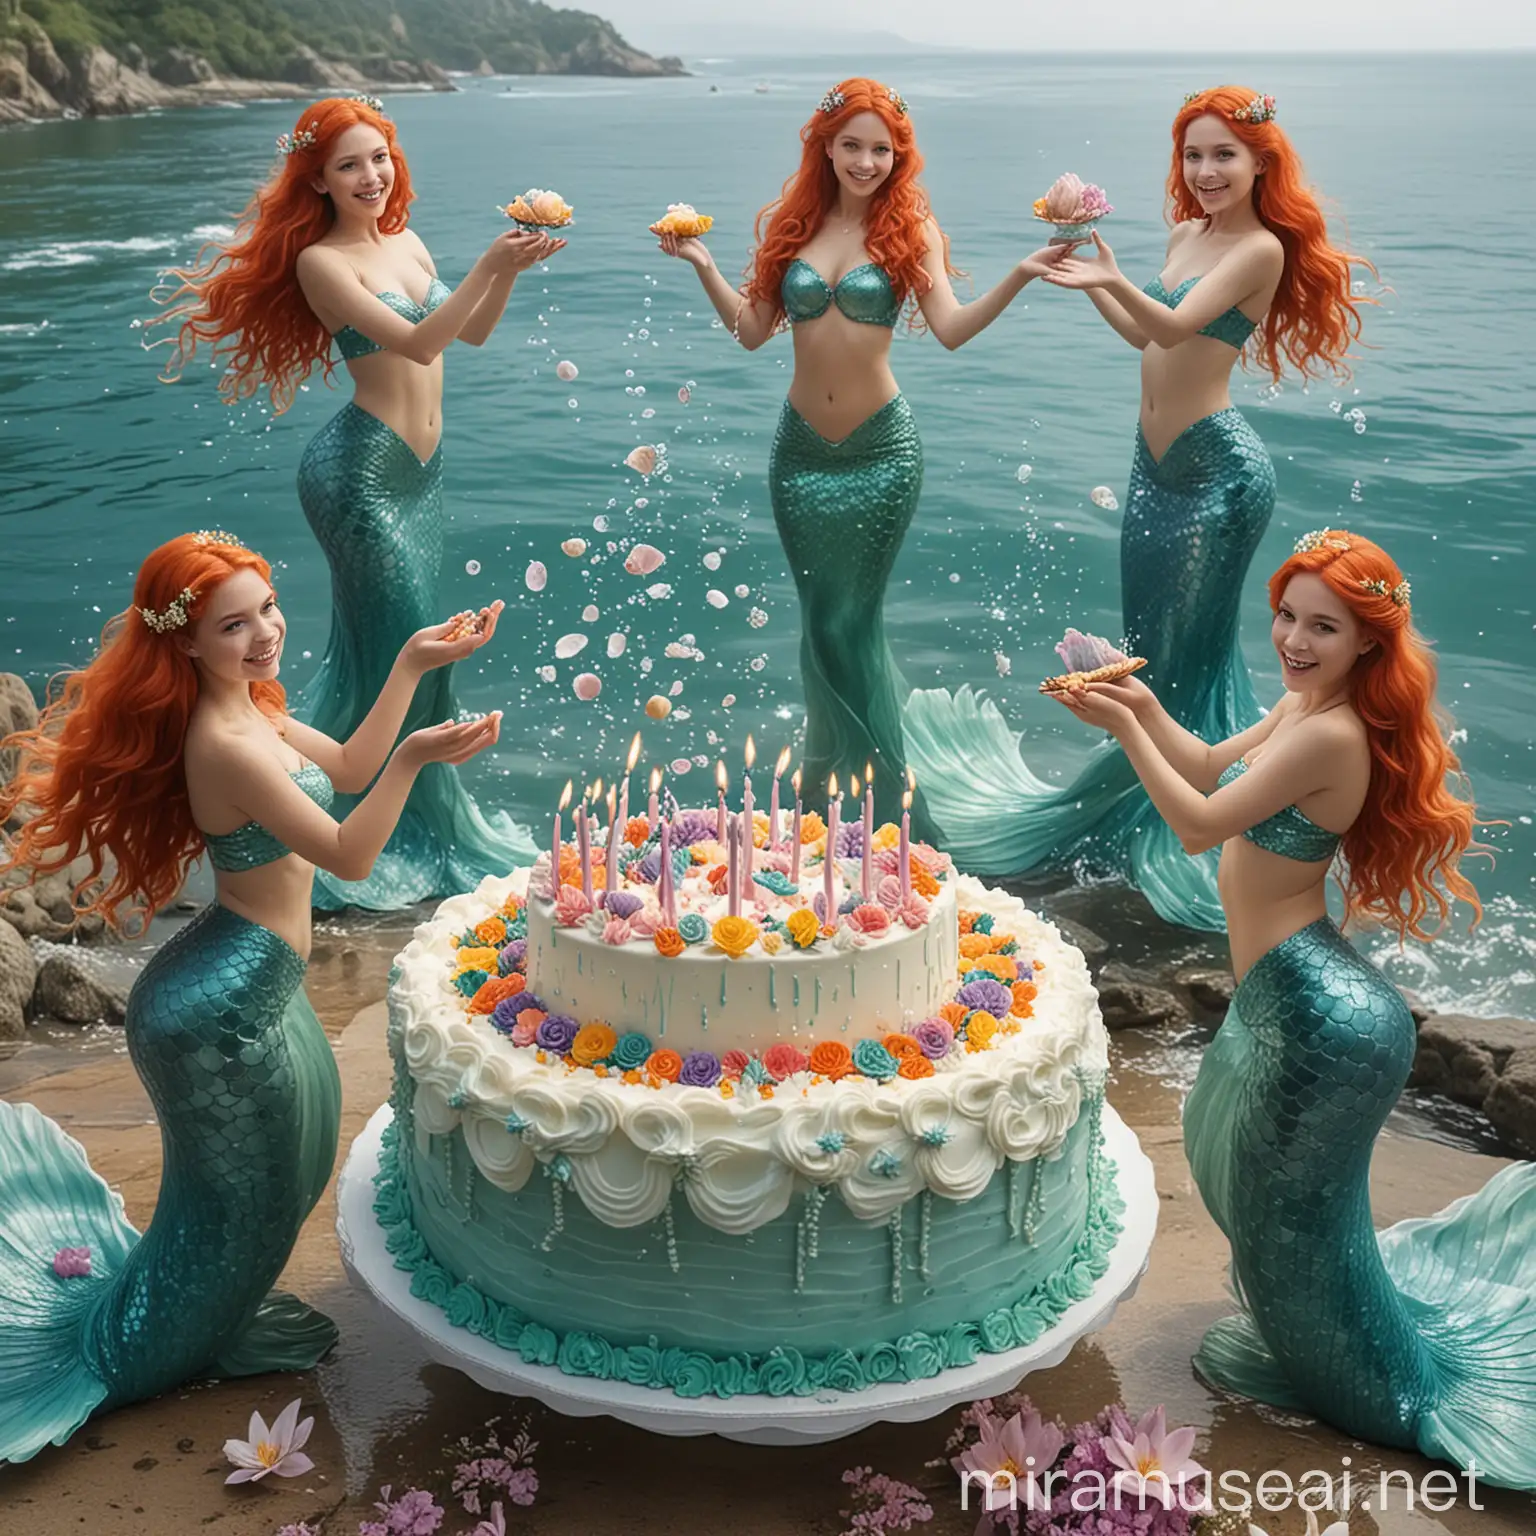 create an image where 8 mermaids dance around the main mermaid, they have a cake and bouquets in their hands, they congratulate the main mermaid on her birthday